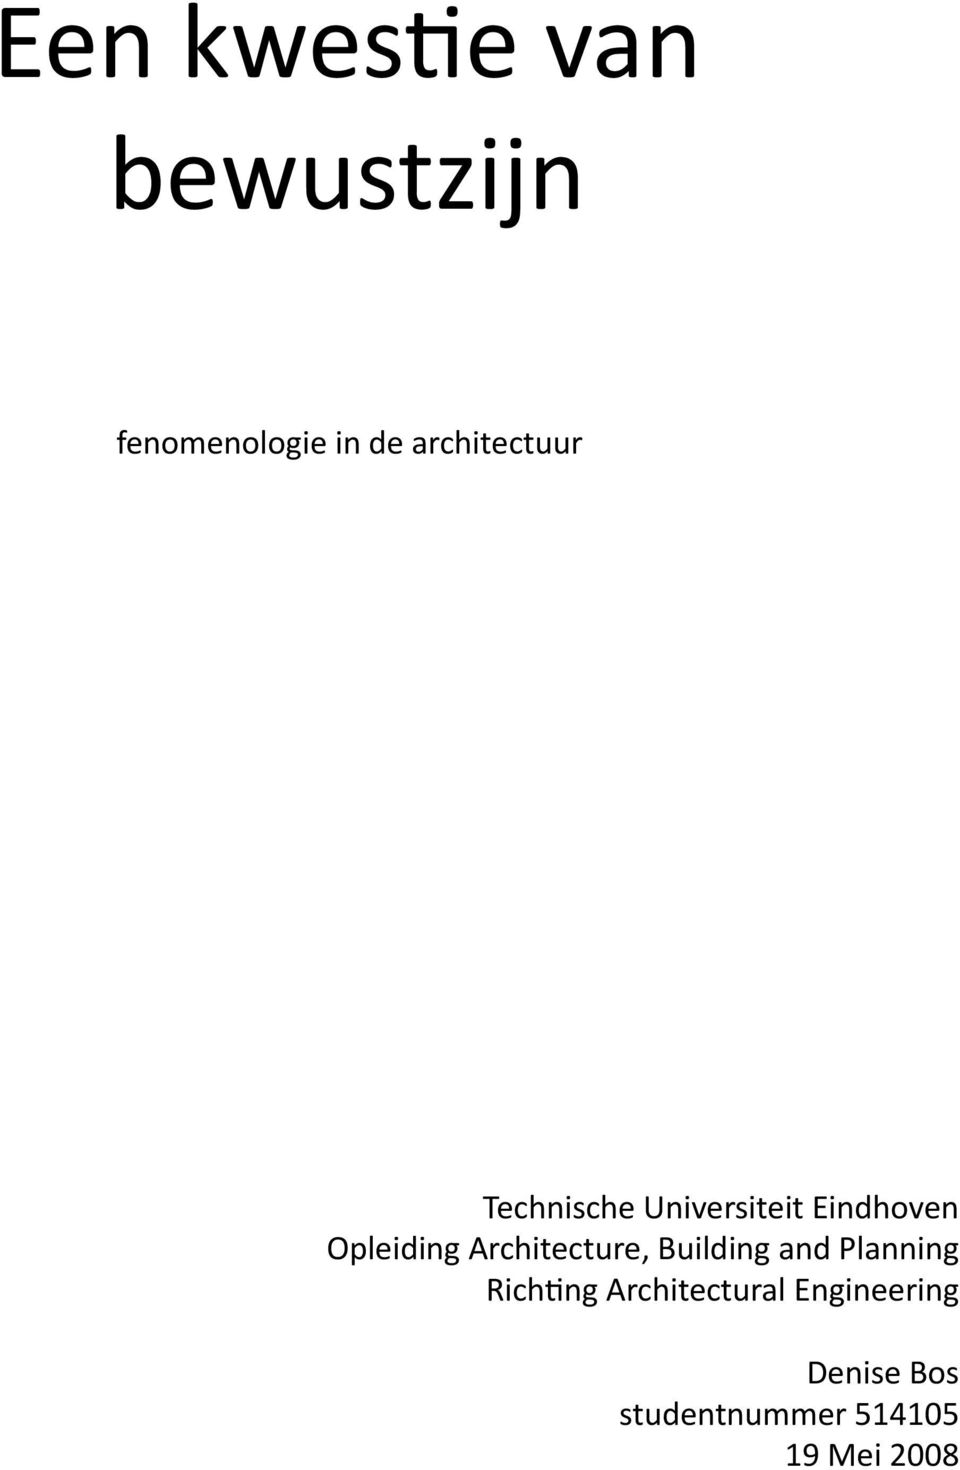 Opleiding Architecture, Building and Planning Richting